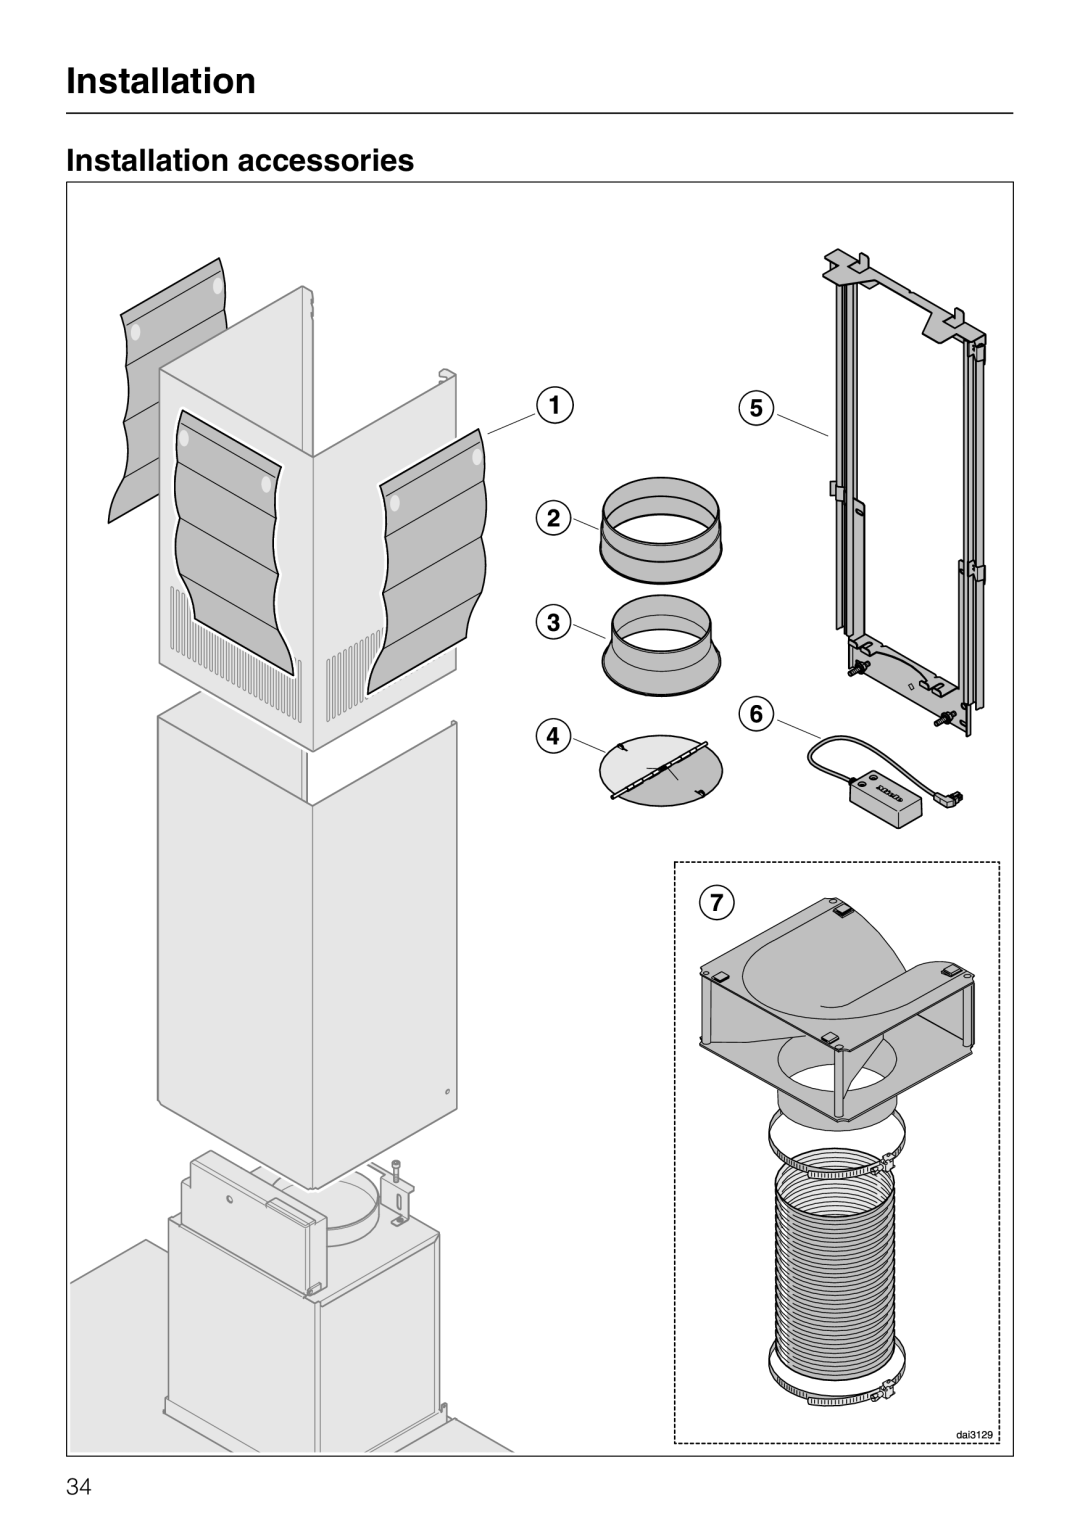 Miele 09 730 840 installation instructions Installation accessories 